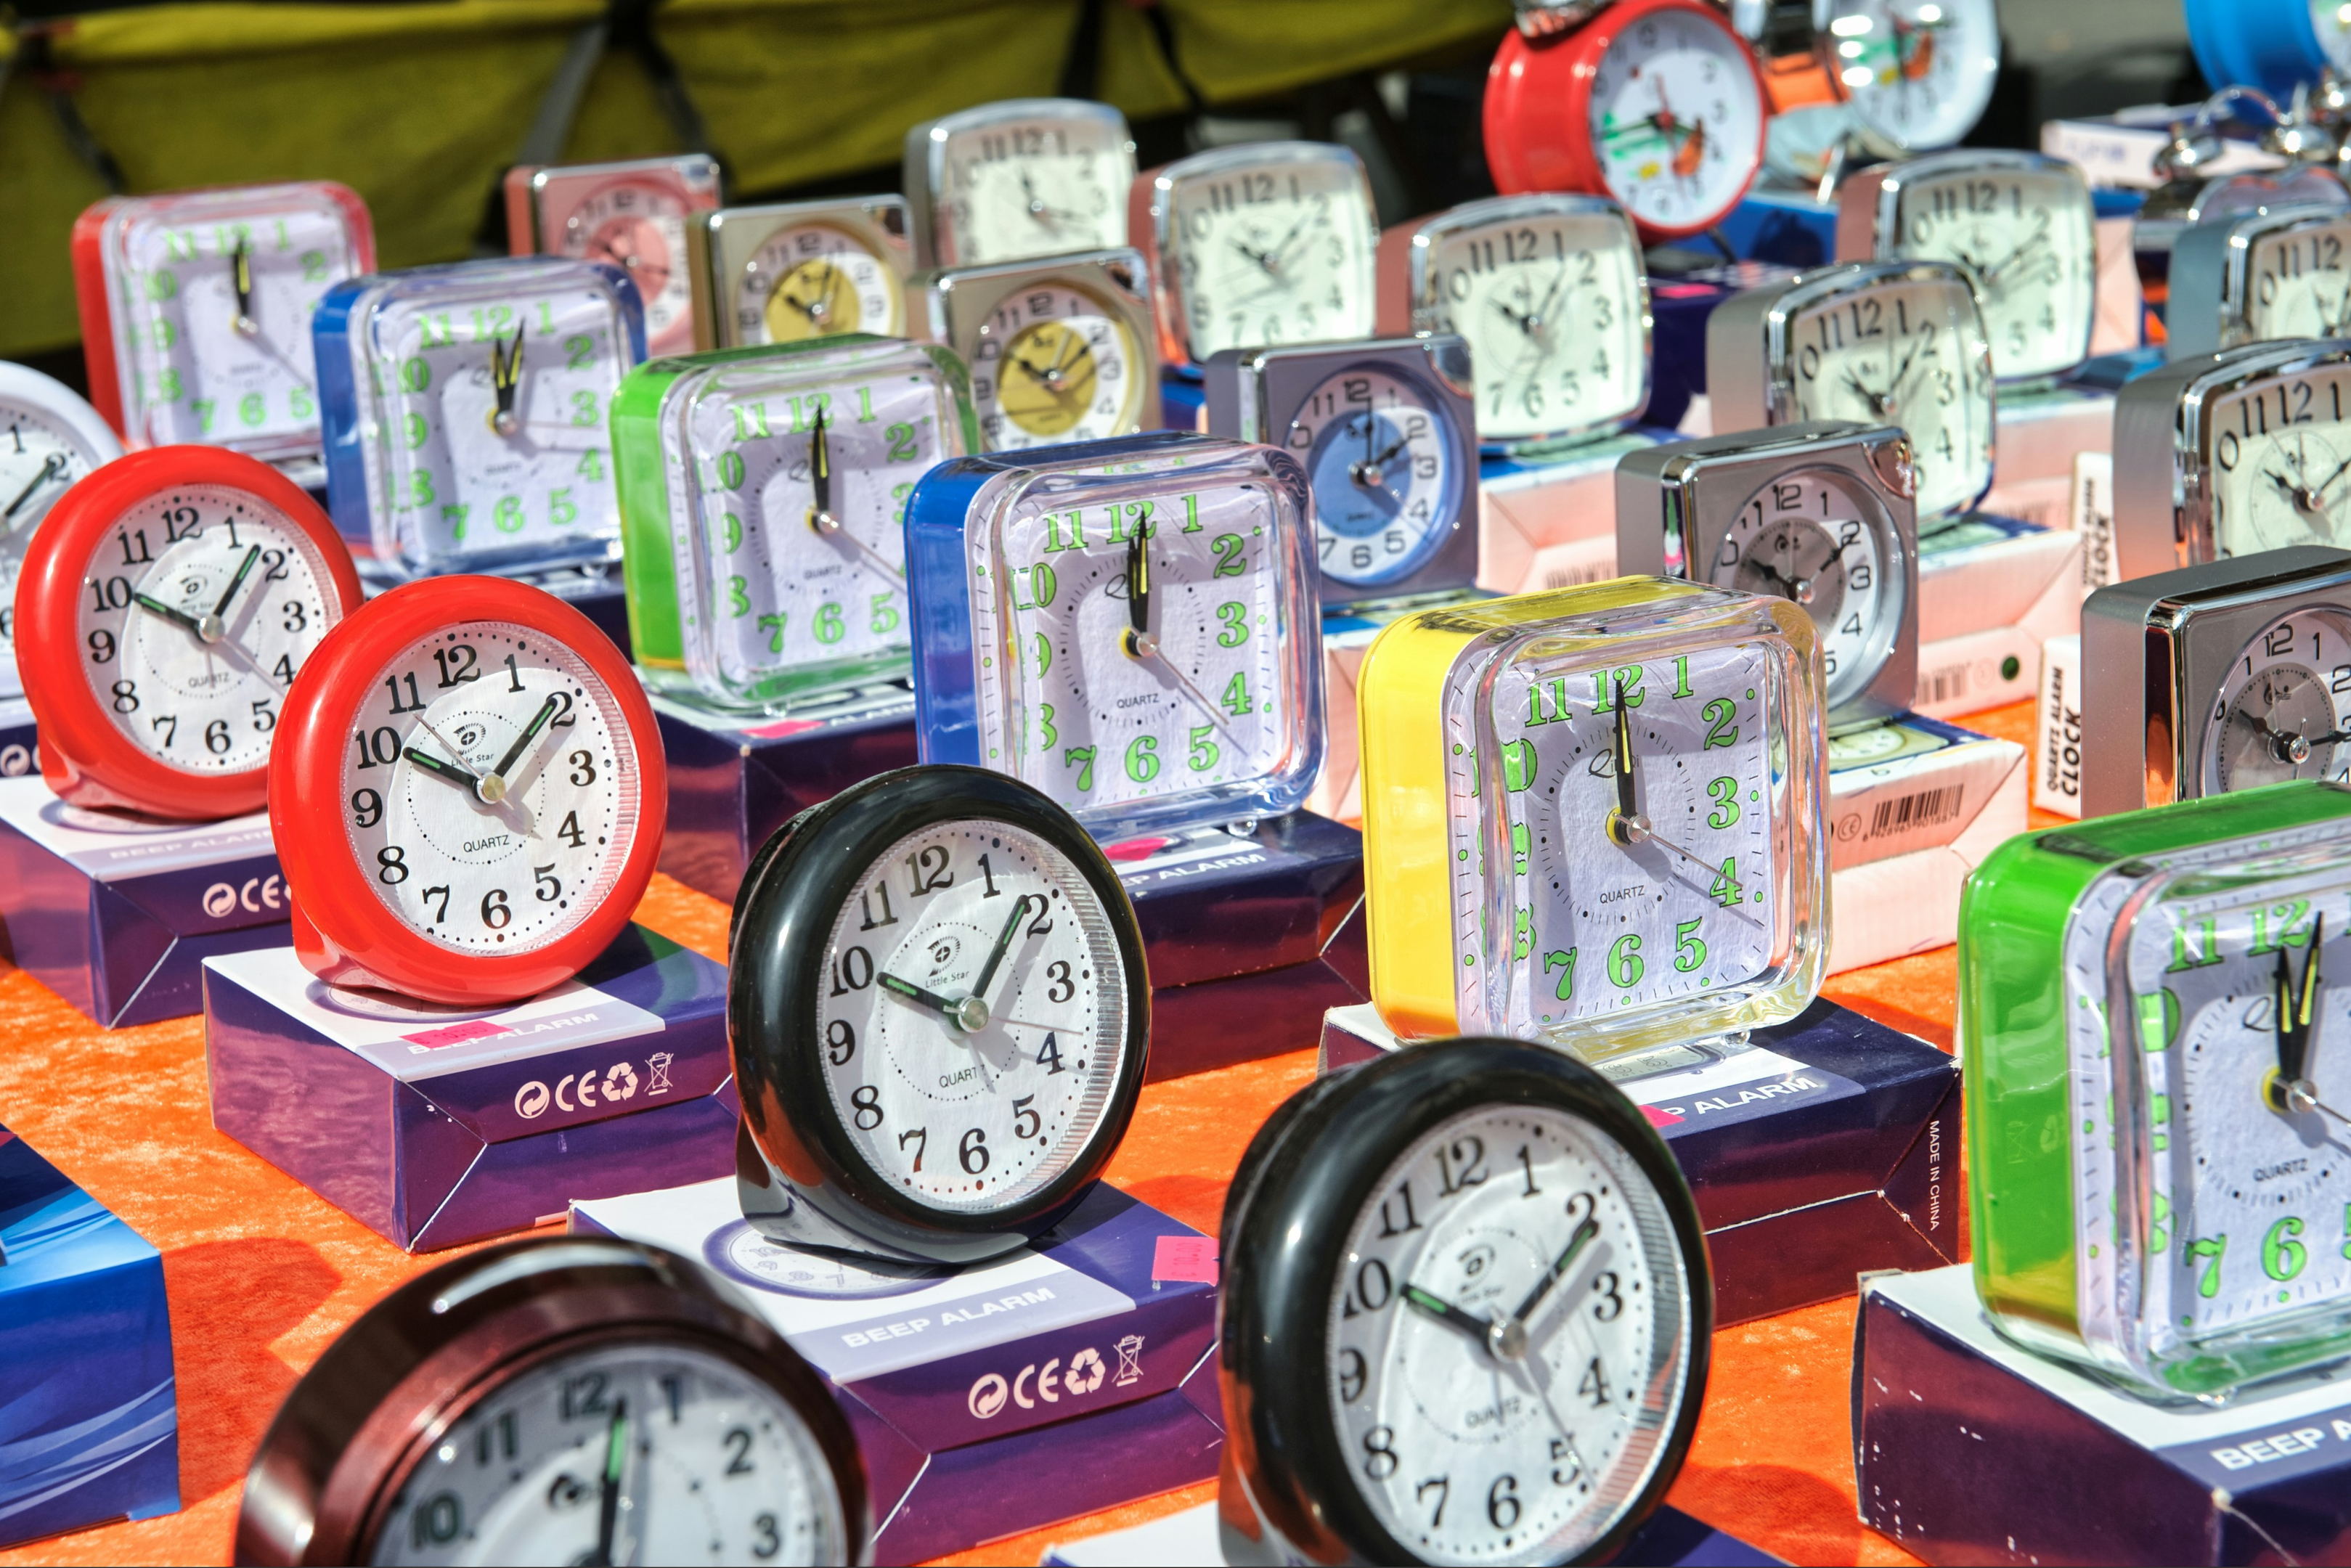 A lot of colorful analog clocks